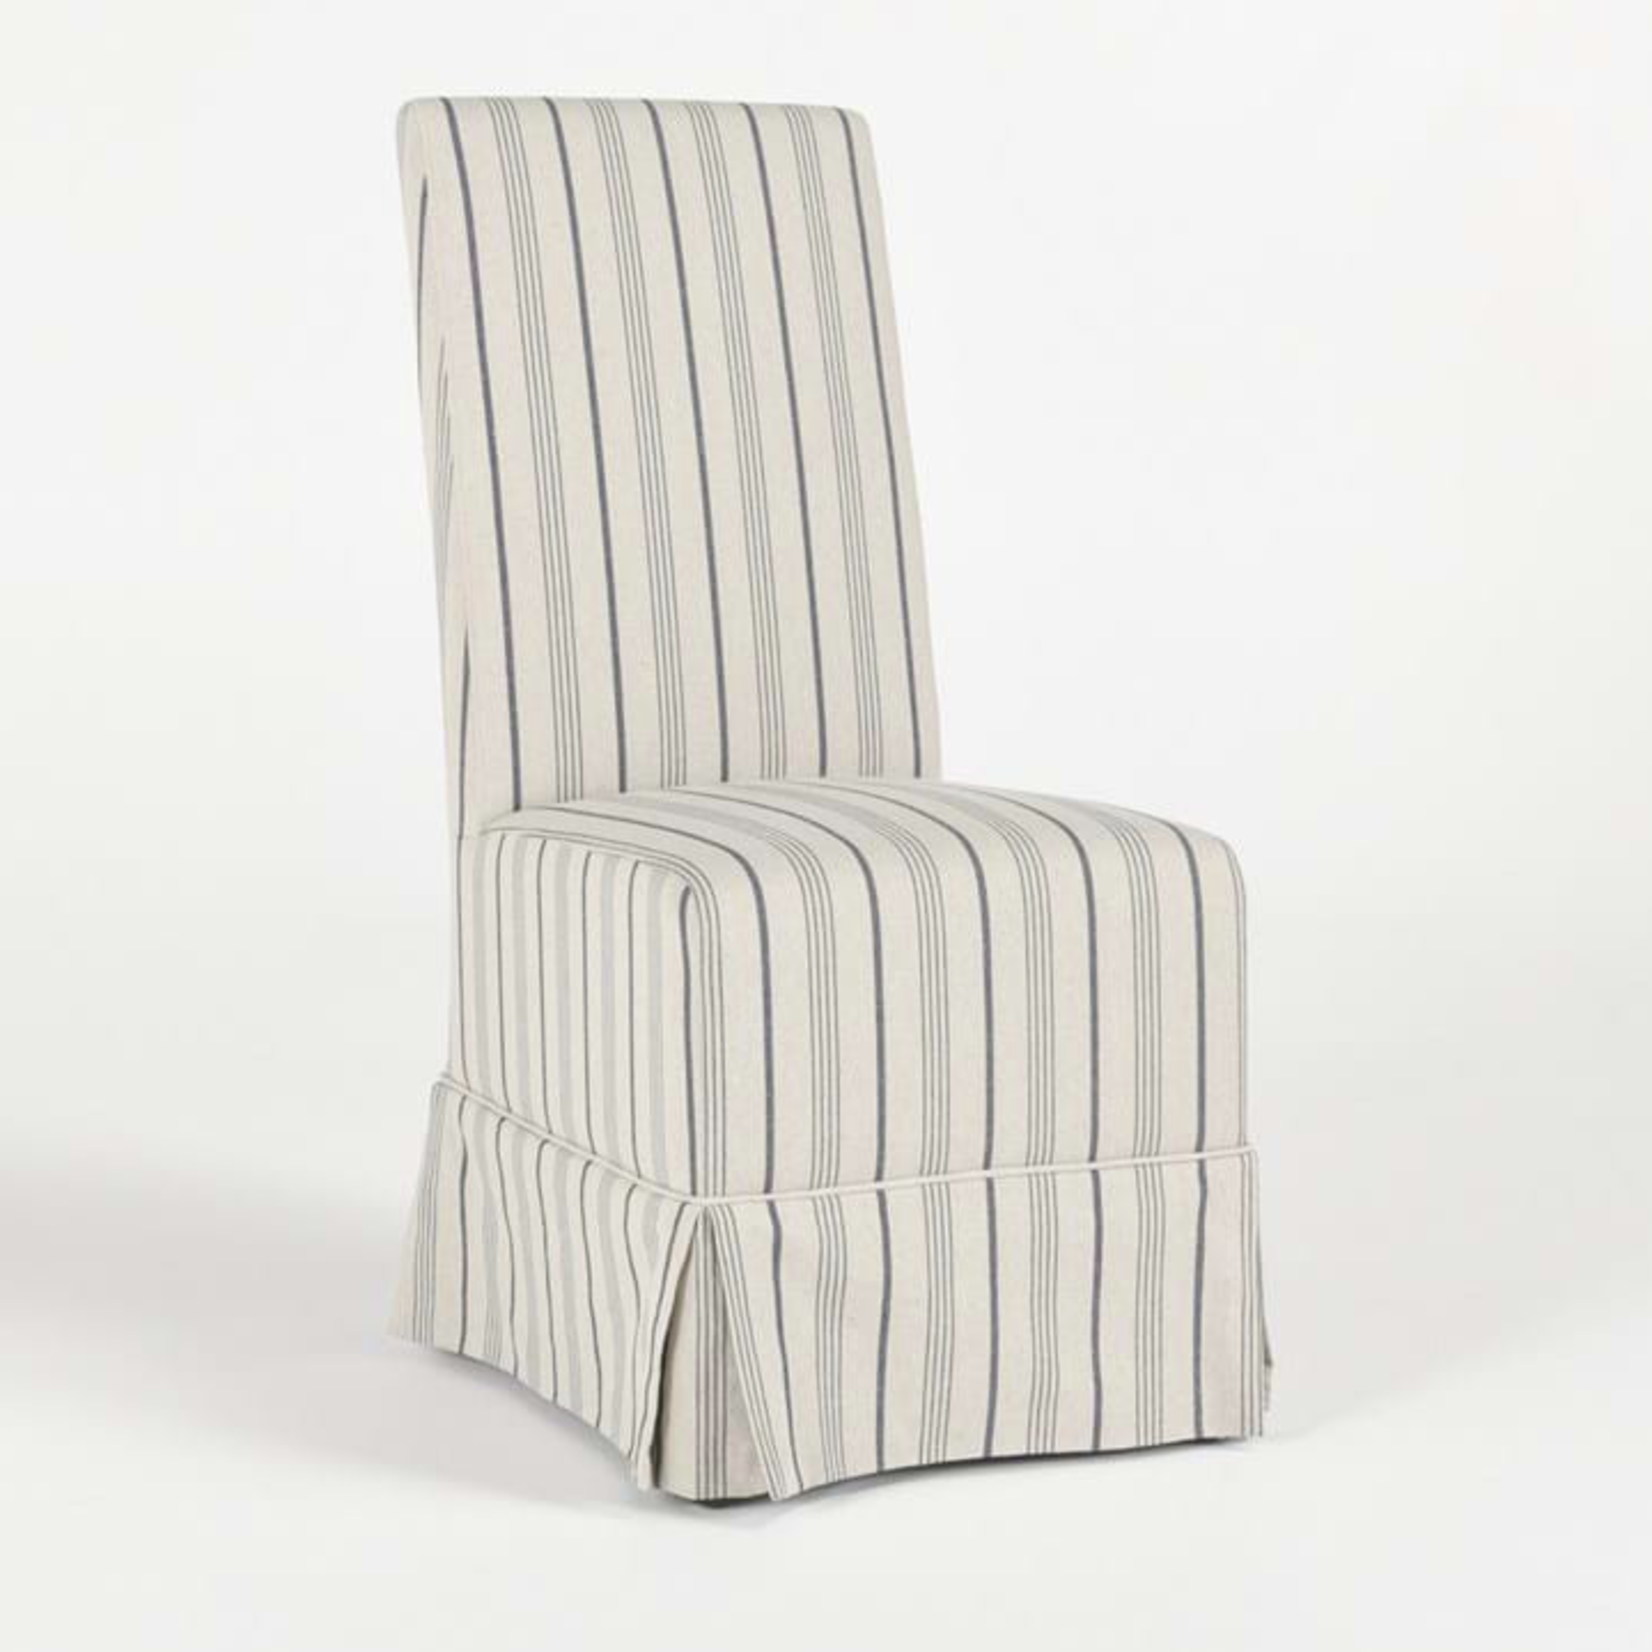 Outside The Box Melrose Blue Stripe Linen Birch Wood Dining Chair